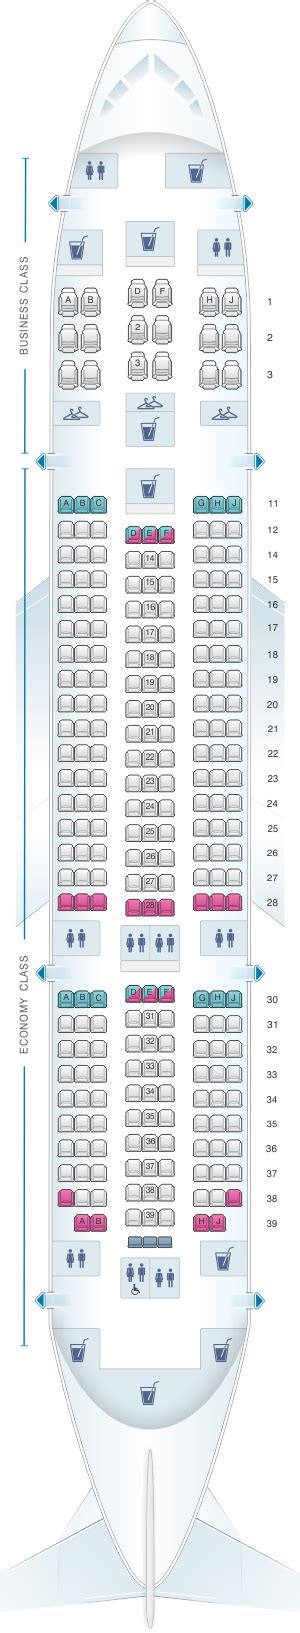 Before your next flight, use air india seat maps & fleet list to find its most comfortable seats fleet list: Seating Plan Boeing 777 300er Air India | Brokeasshome.com